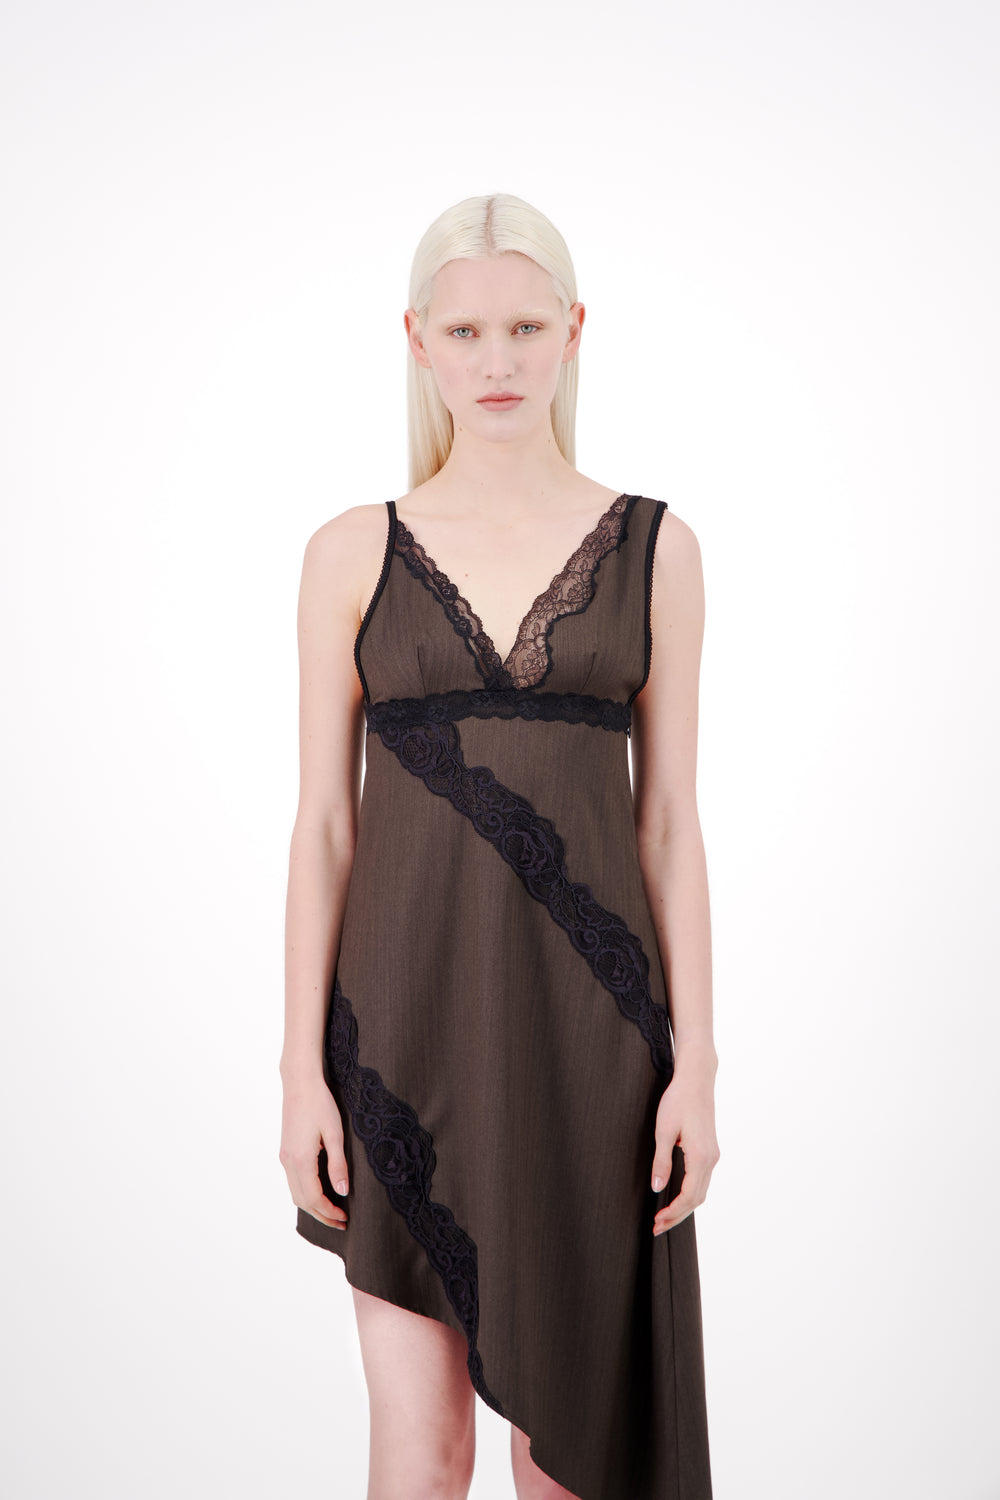 Singlet dress with lace detail - LAST ONE